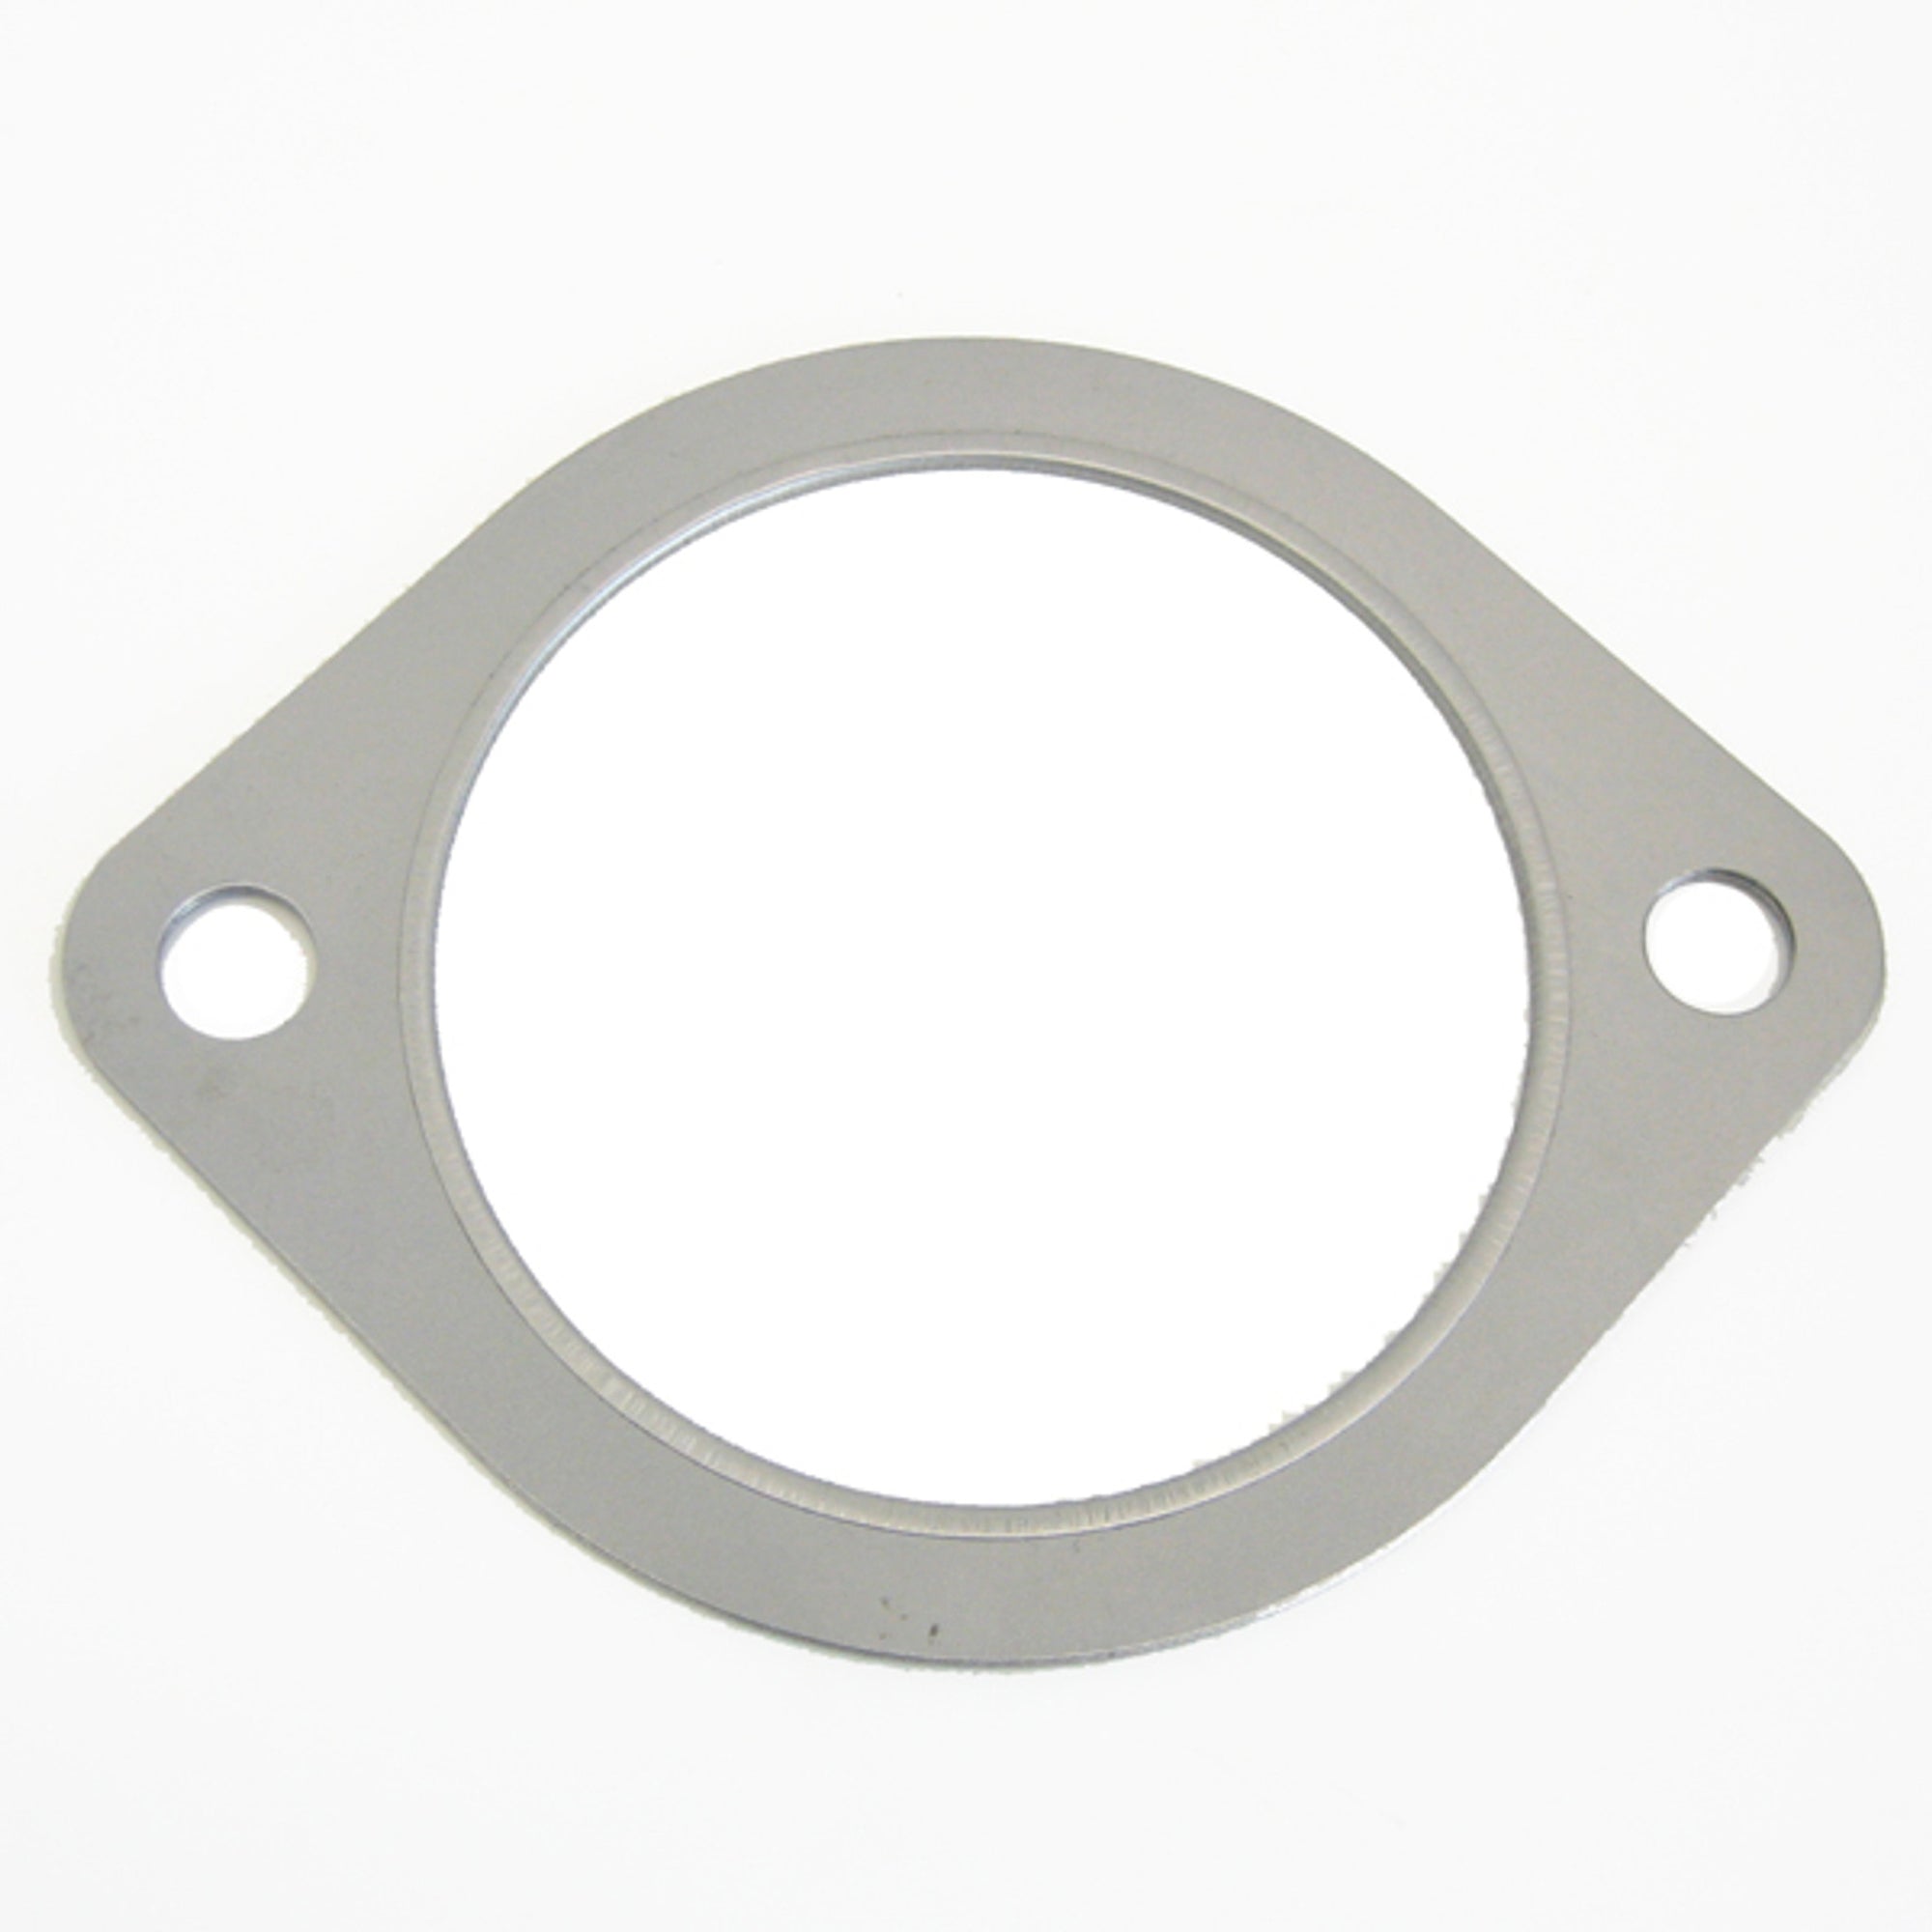 Grimmspeed Cat Back 3-Inch 2-Hole Gasket 2X Thickness